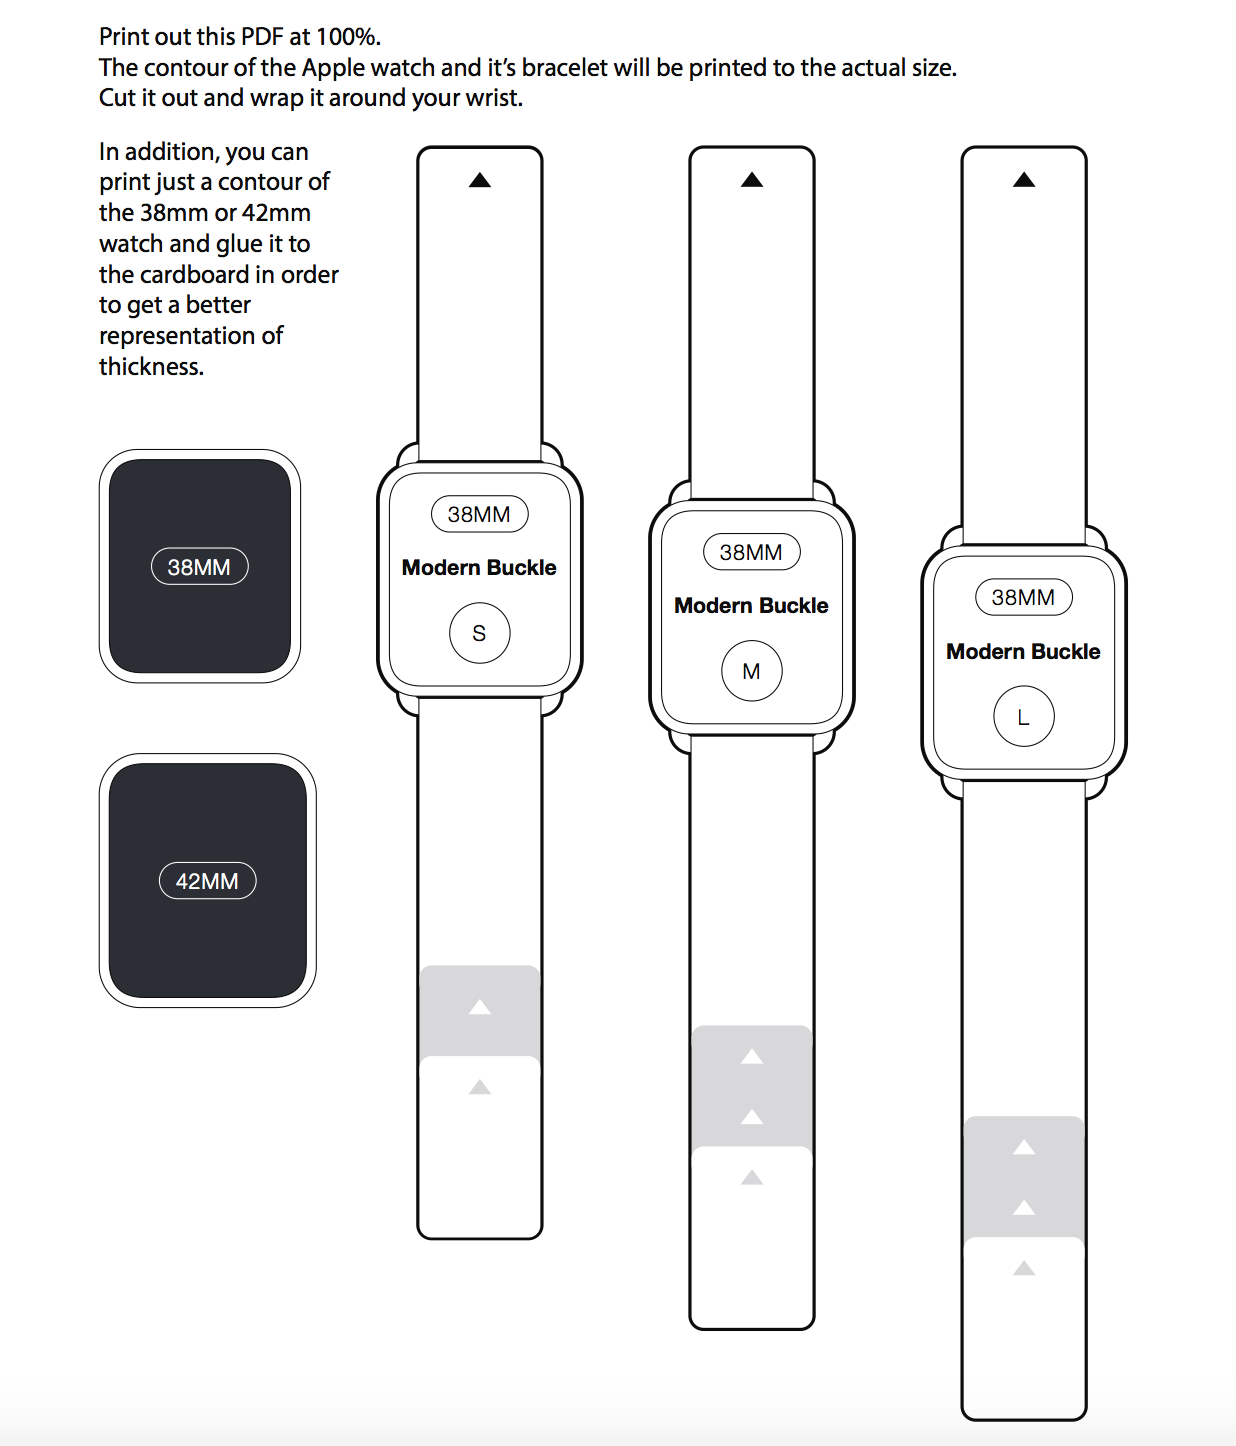 Still Not Sure Which Size Apple Watch or Band to Order? Print Out These